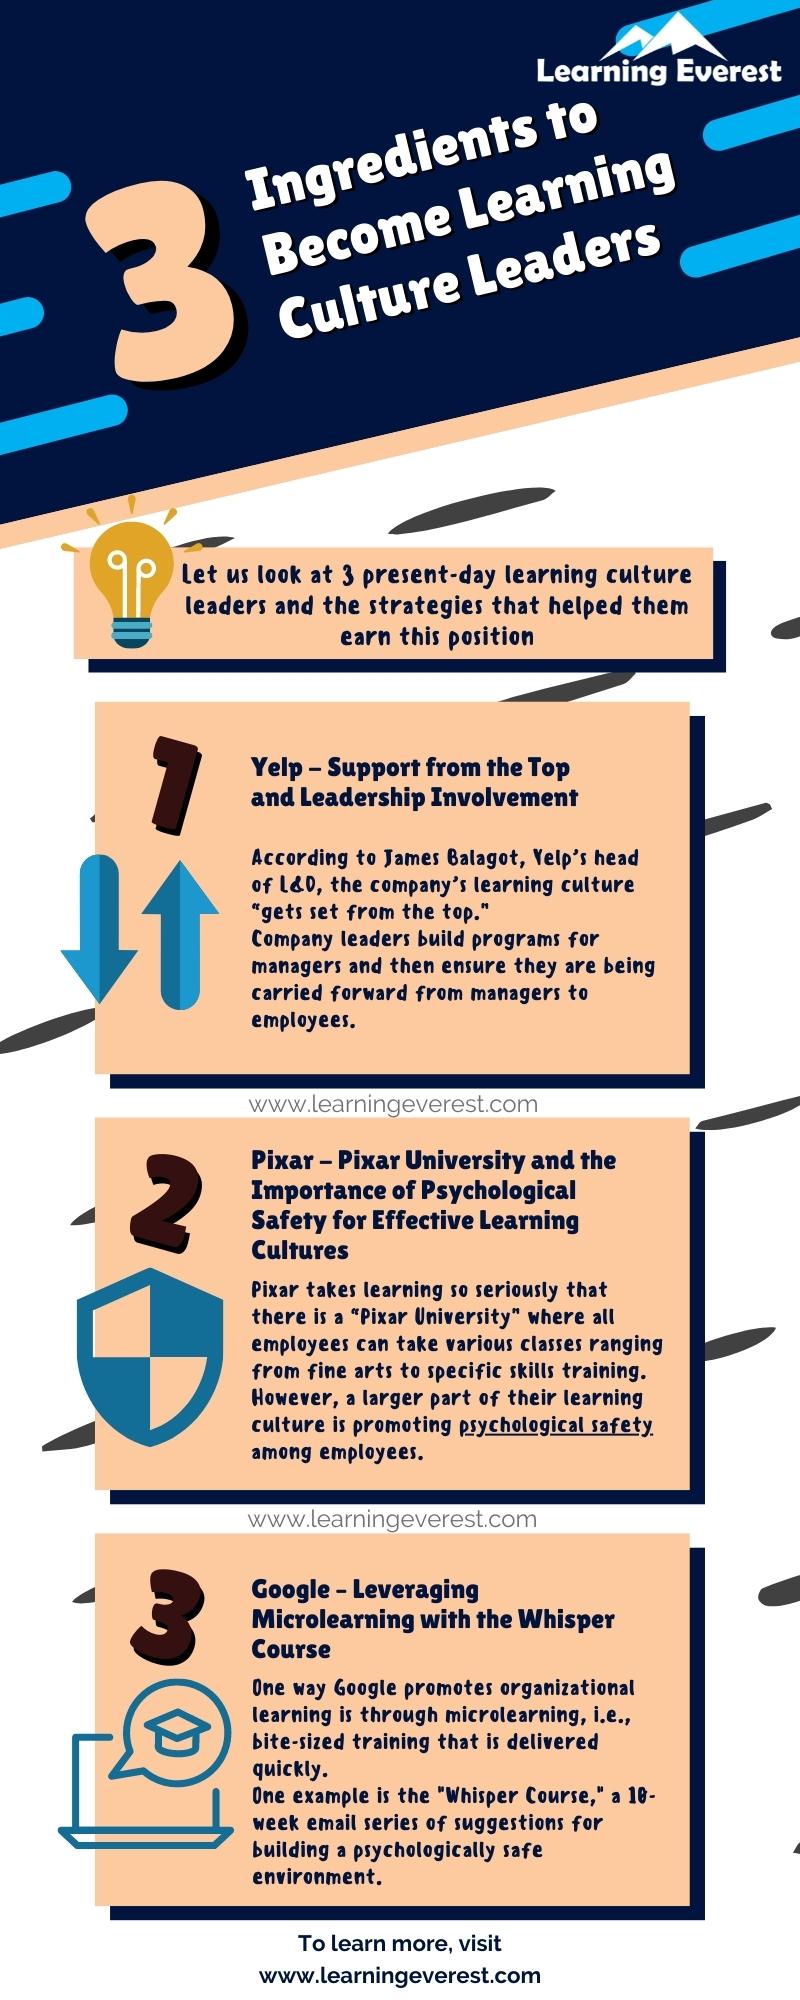 3 Ingredients to Become Learning Culture Leaders Infographic